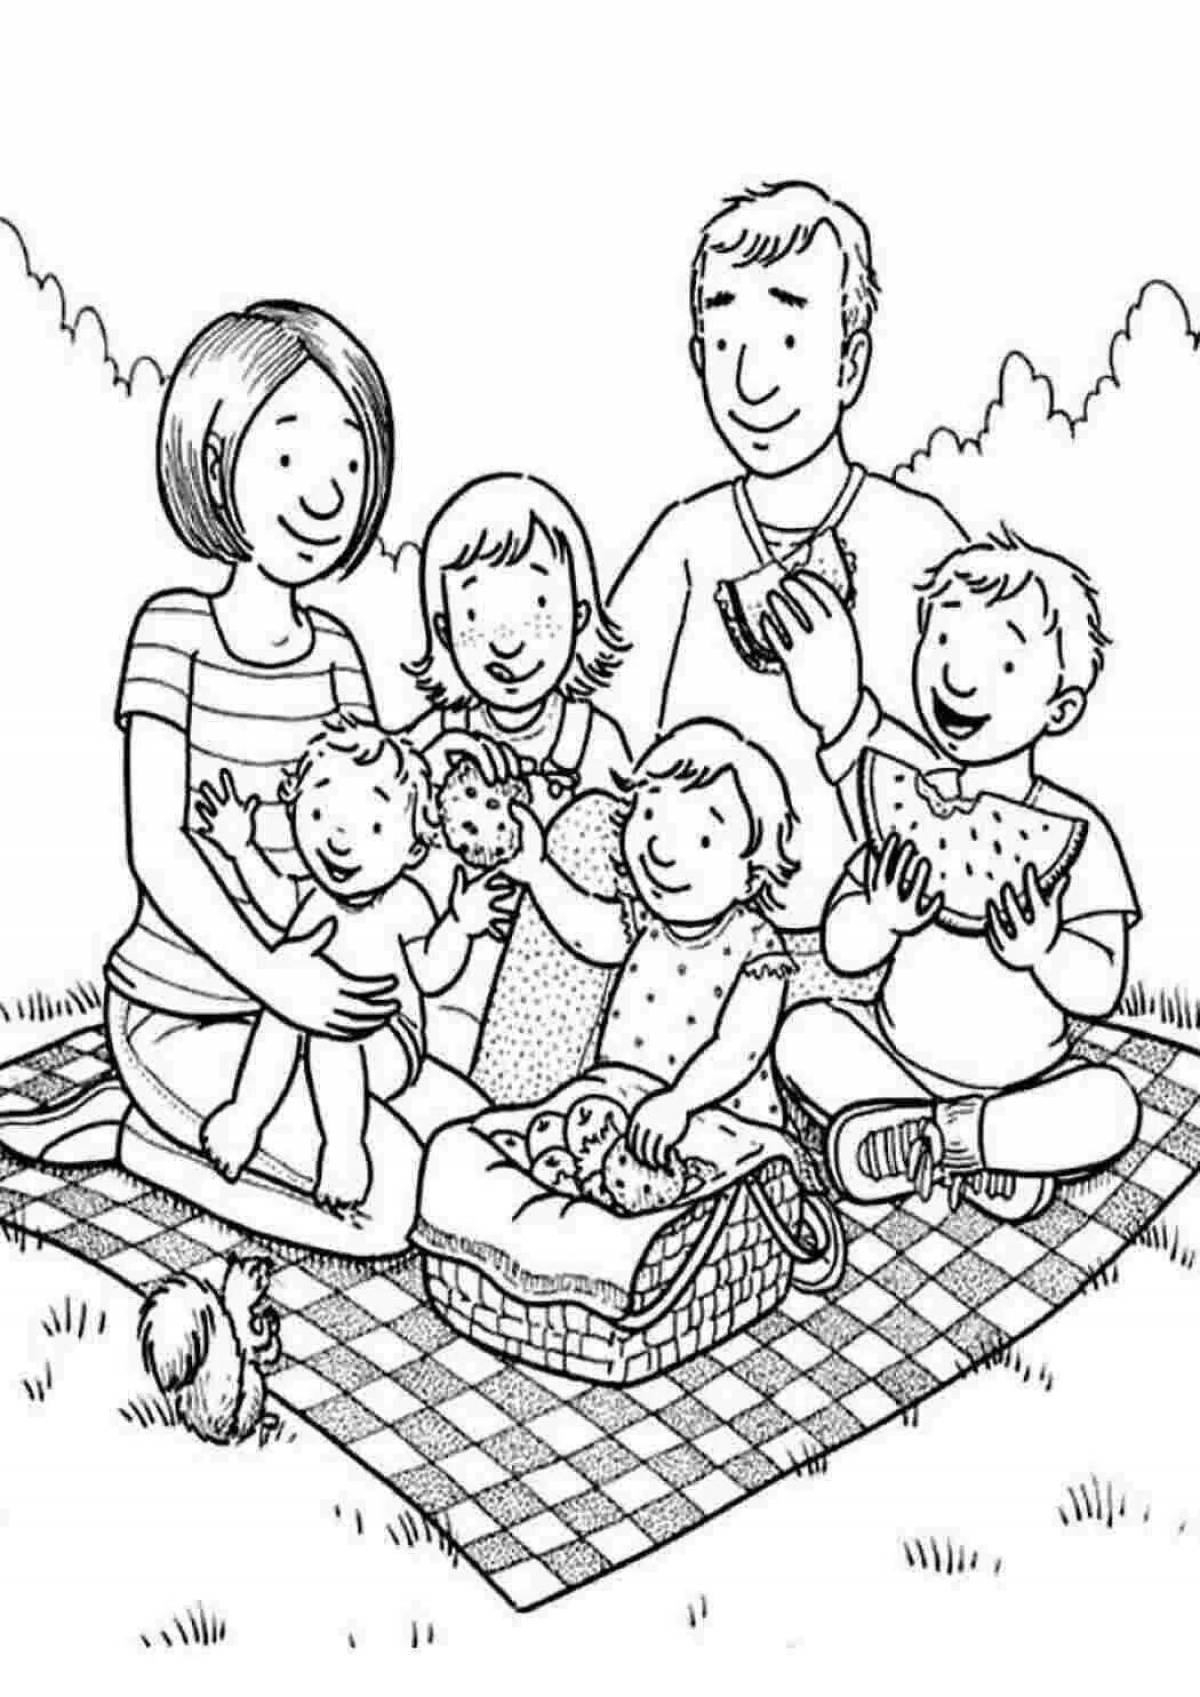 Cute family coloring book for 7 year olds